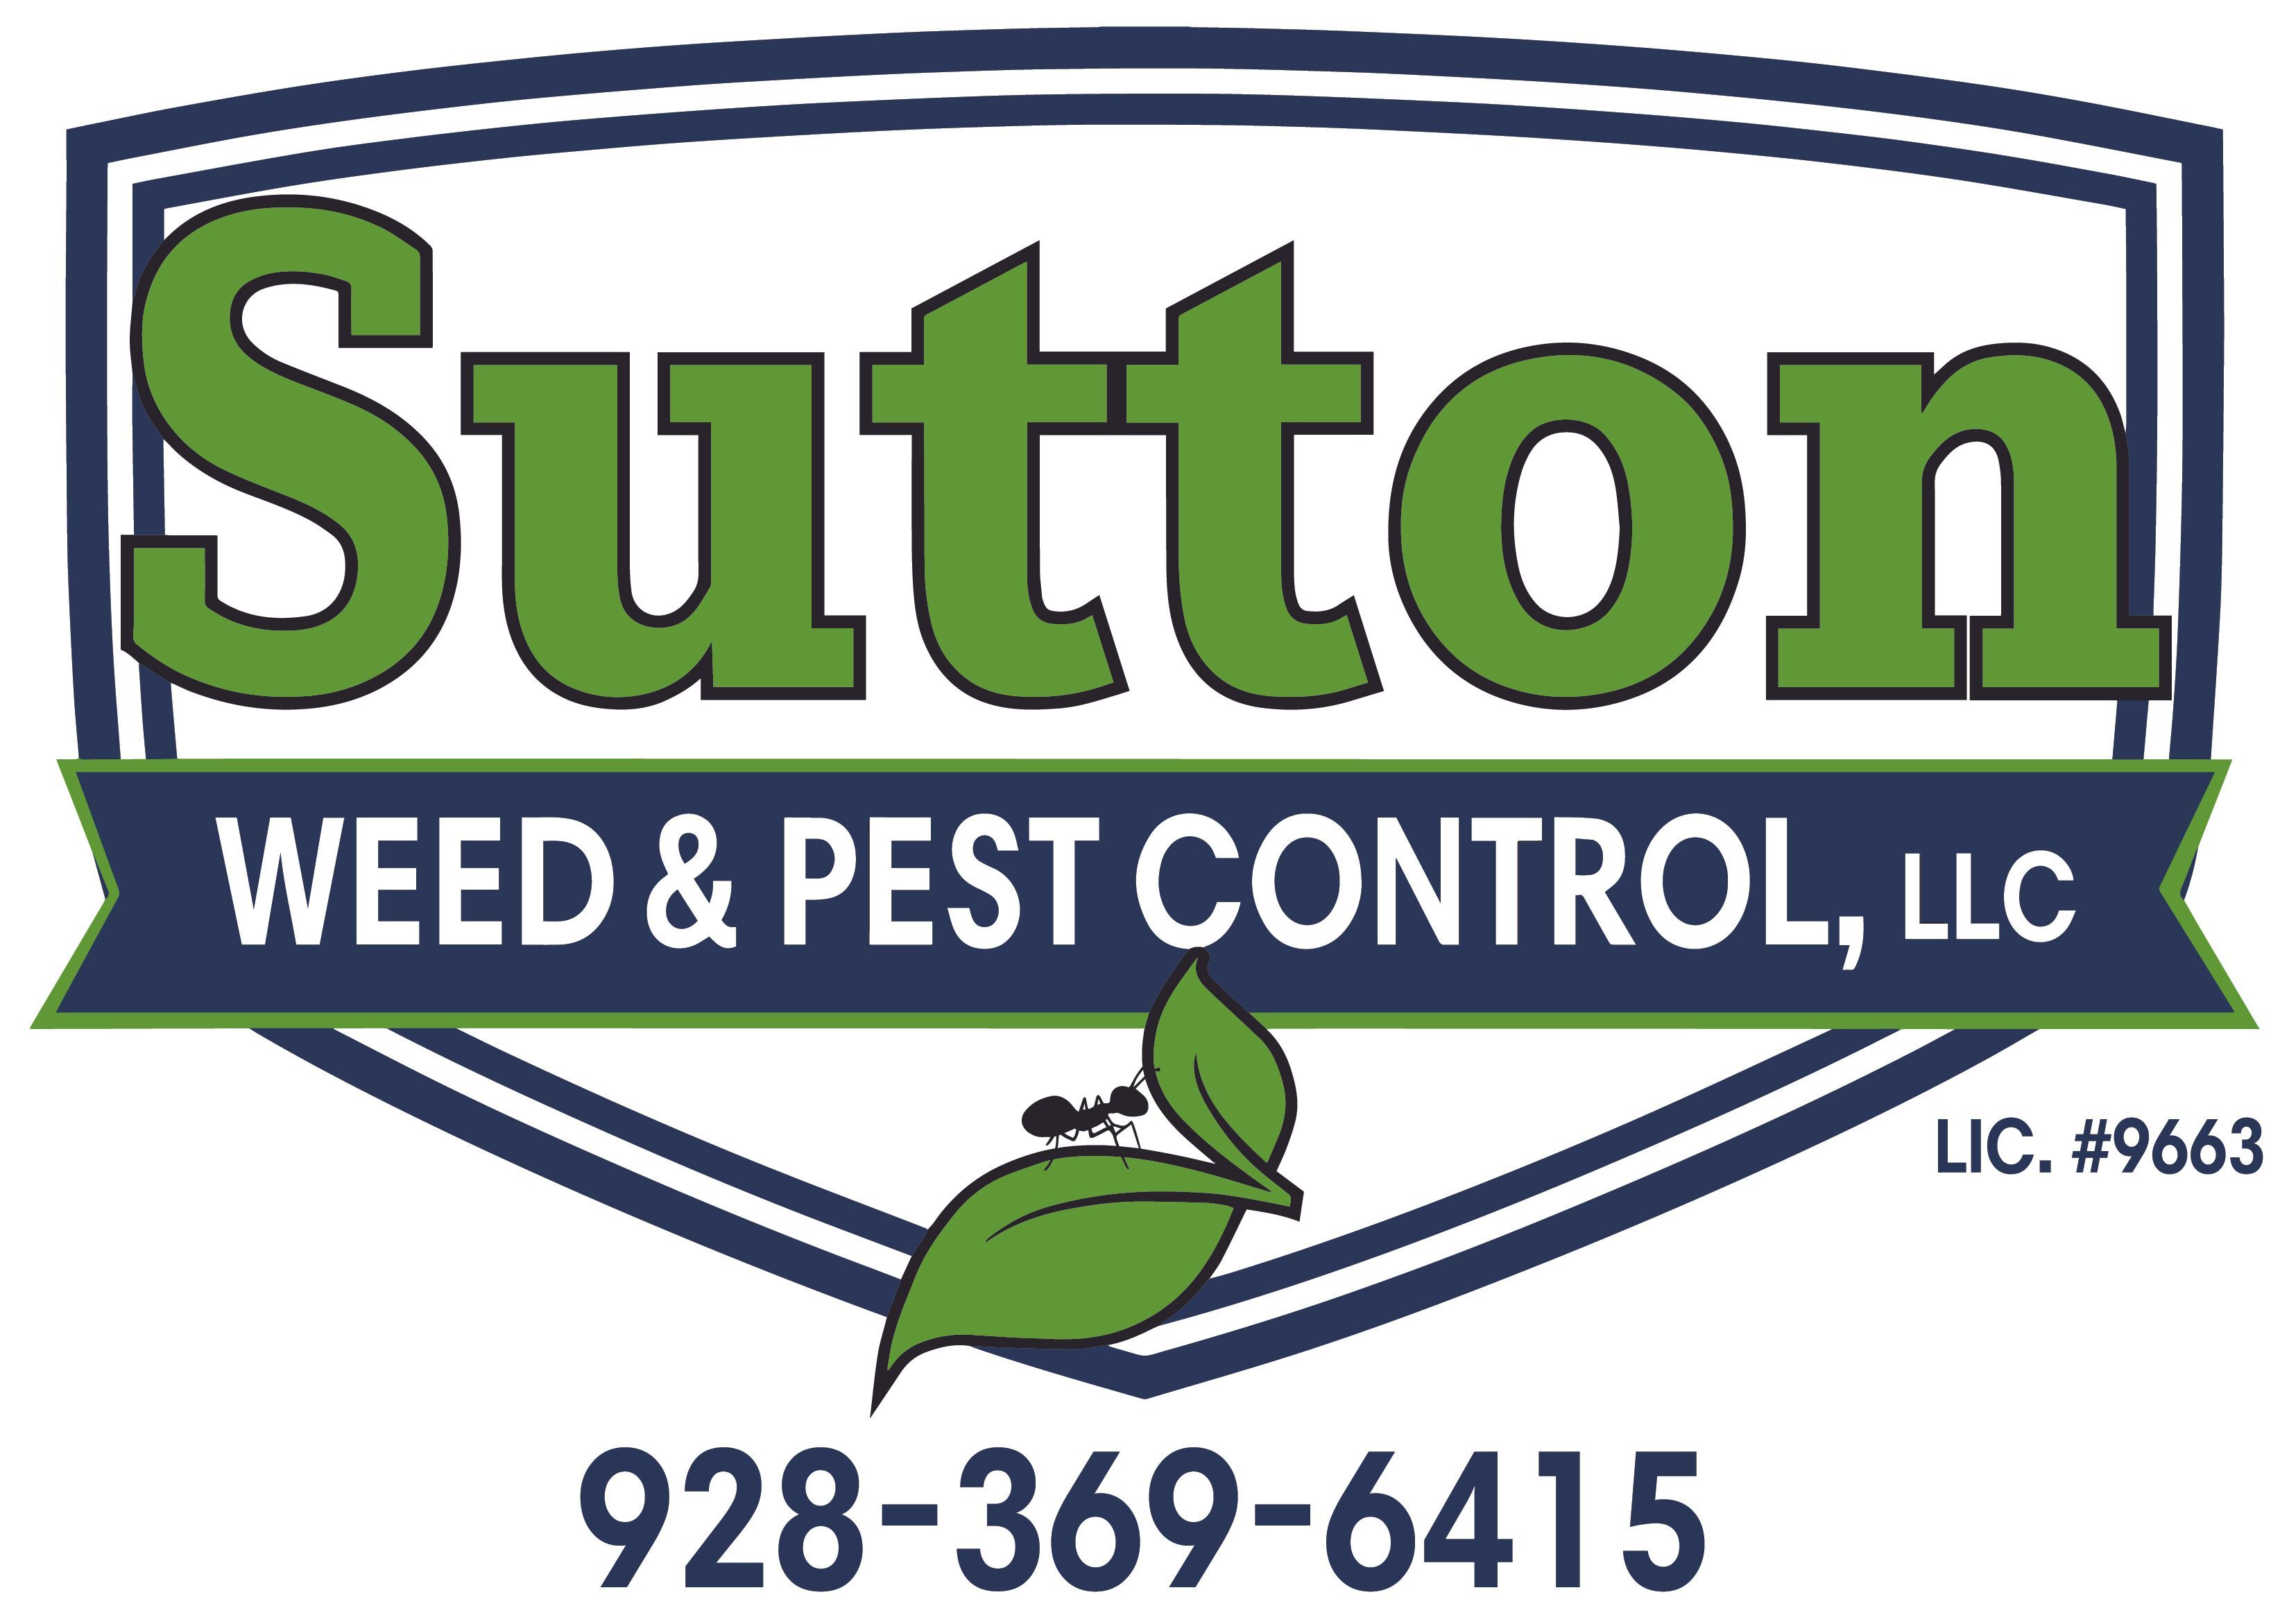 Sutton Weed & Pest Control